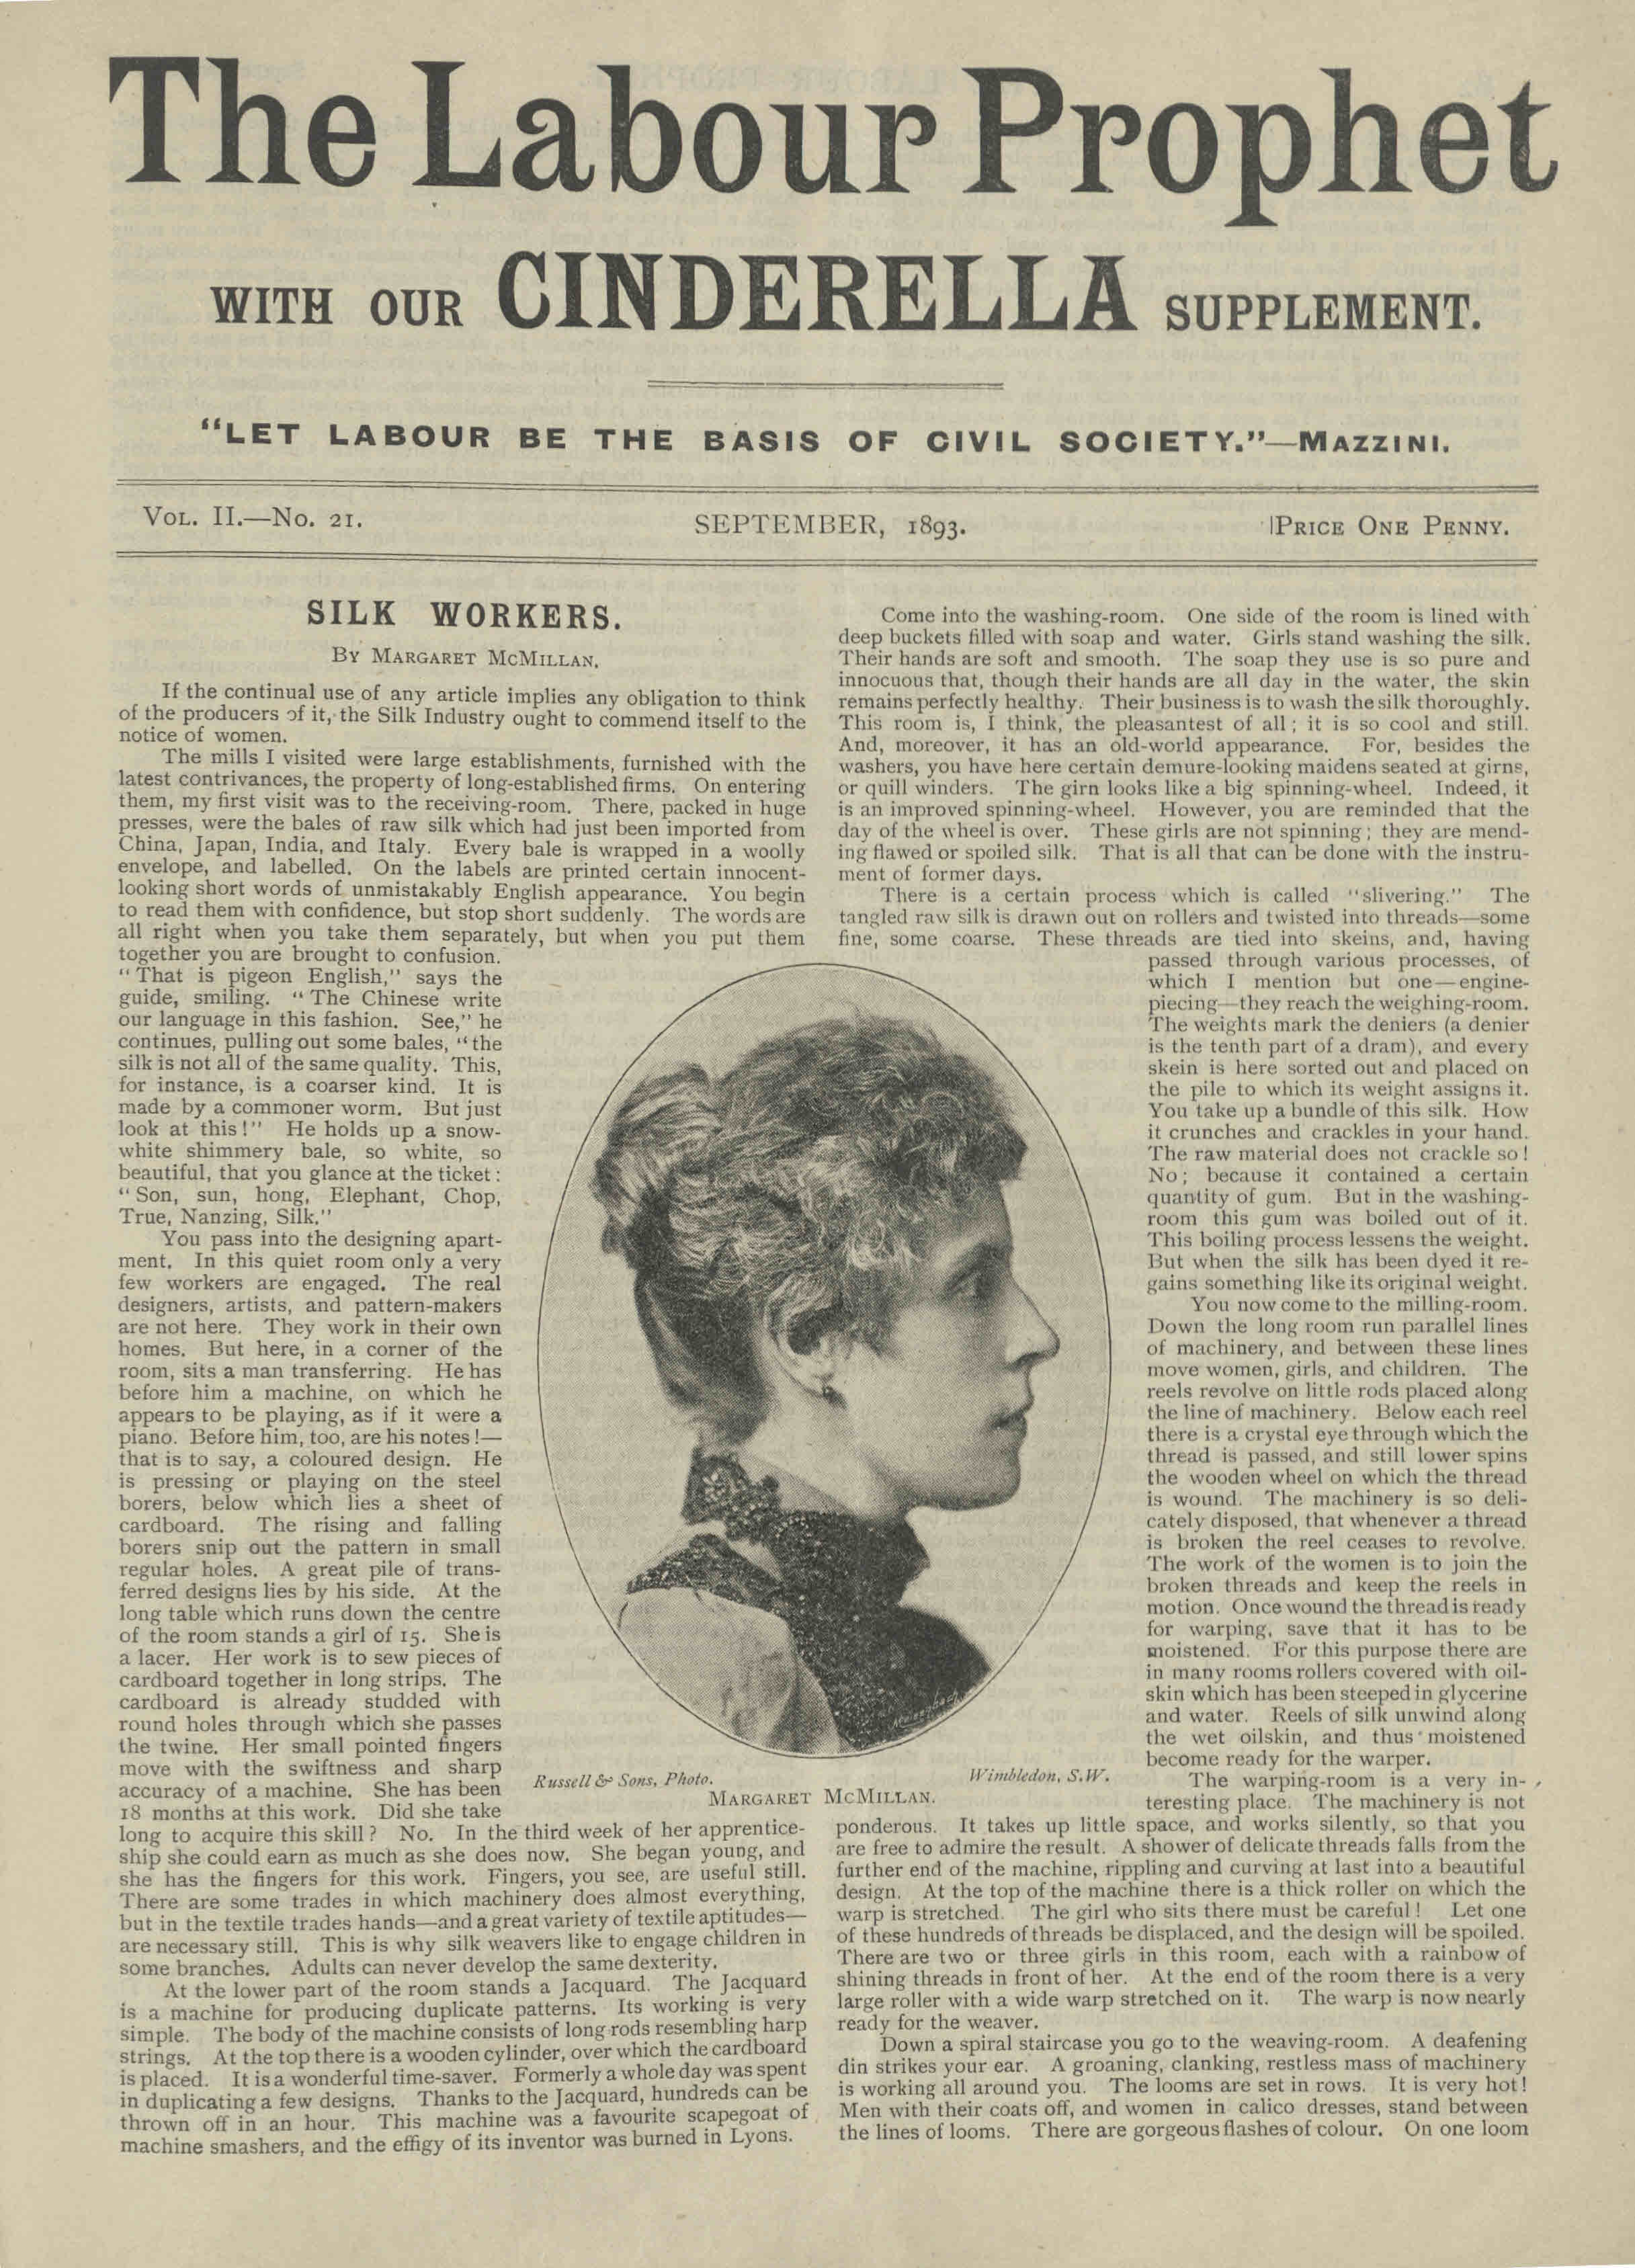 Front page of The Labour Prophet, Sep 1893